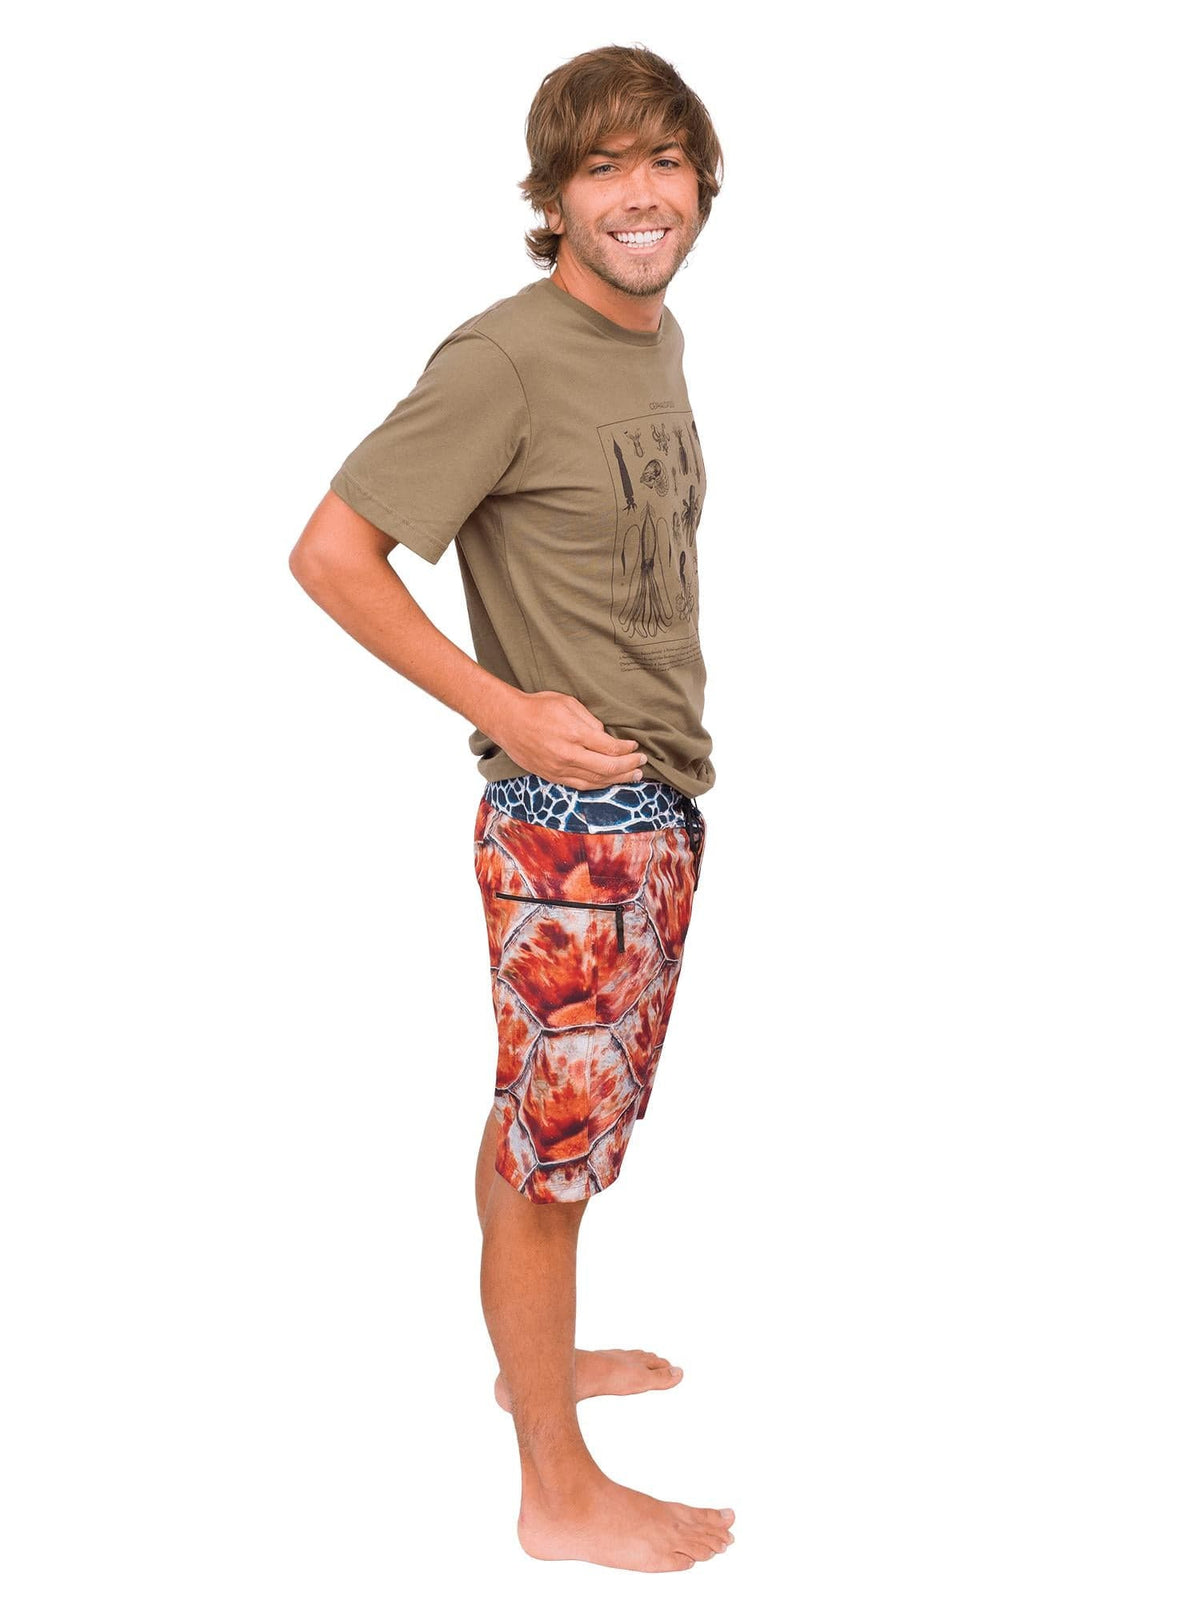 Model: Dan is a sea turtle monitor with Sea Turtle Adventures. He is 5’10, 140 lbs and is wearing a size 31 boardshort and M tee.